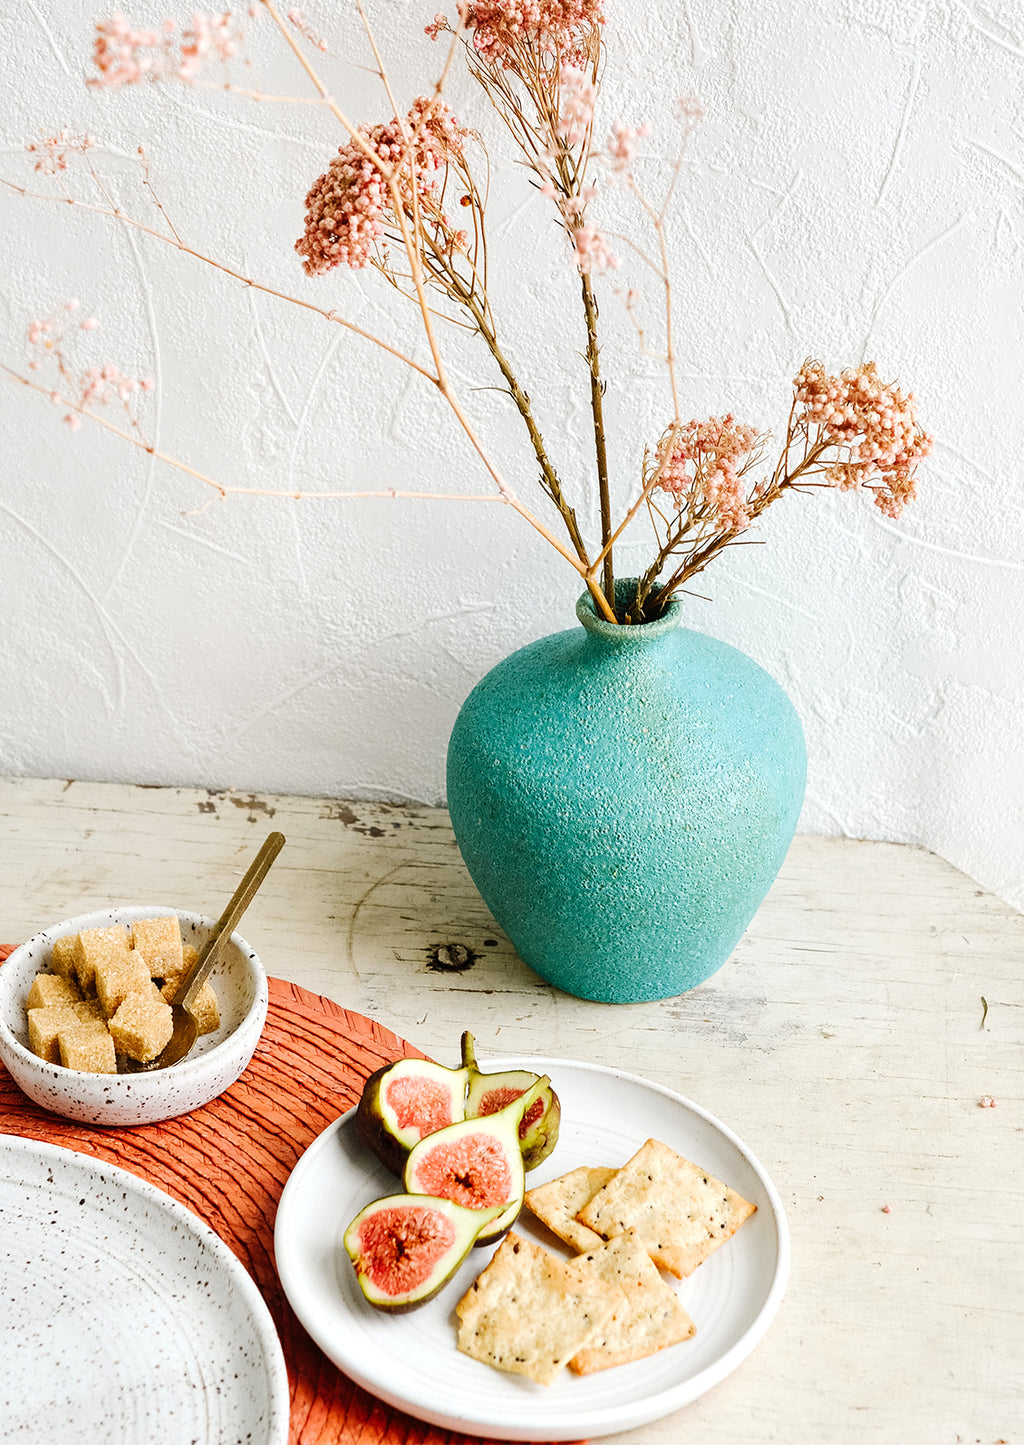 3: A turquoise ceramic vase amidst a breakfast tabletop scene.